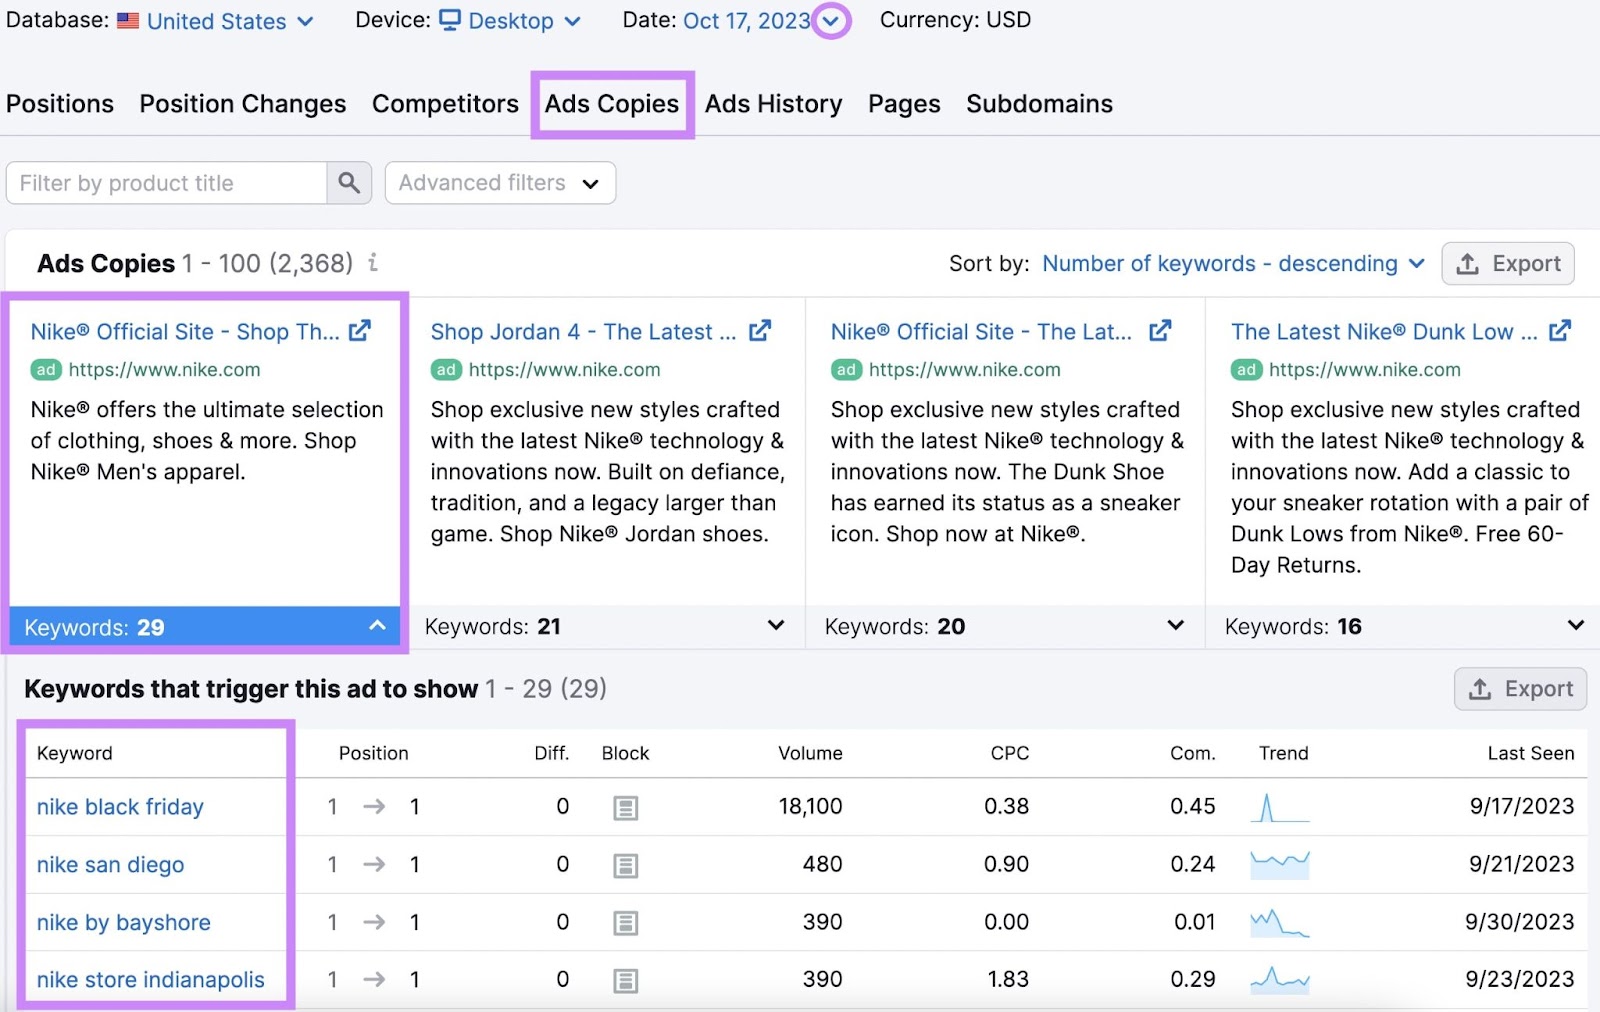 “Ads Copies” dashboard in Advertising Research tool